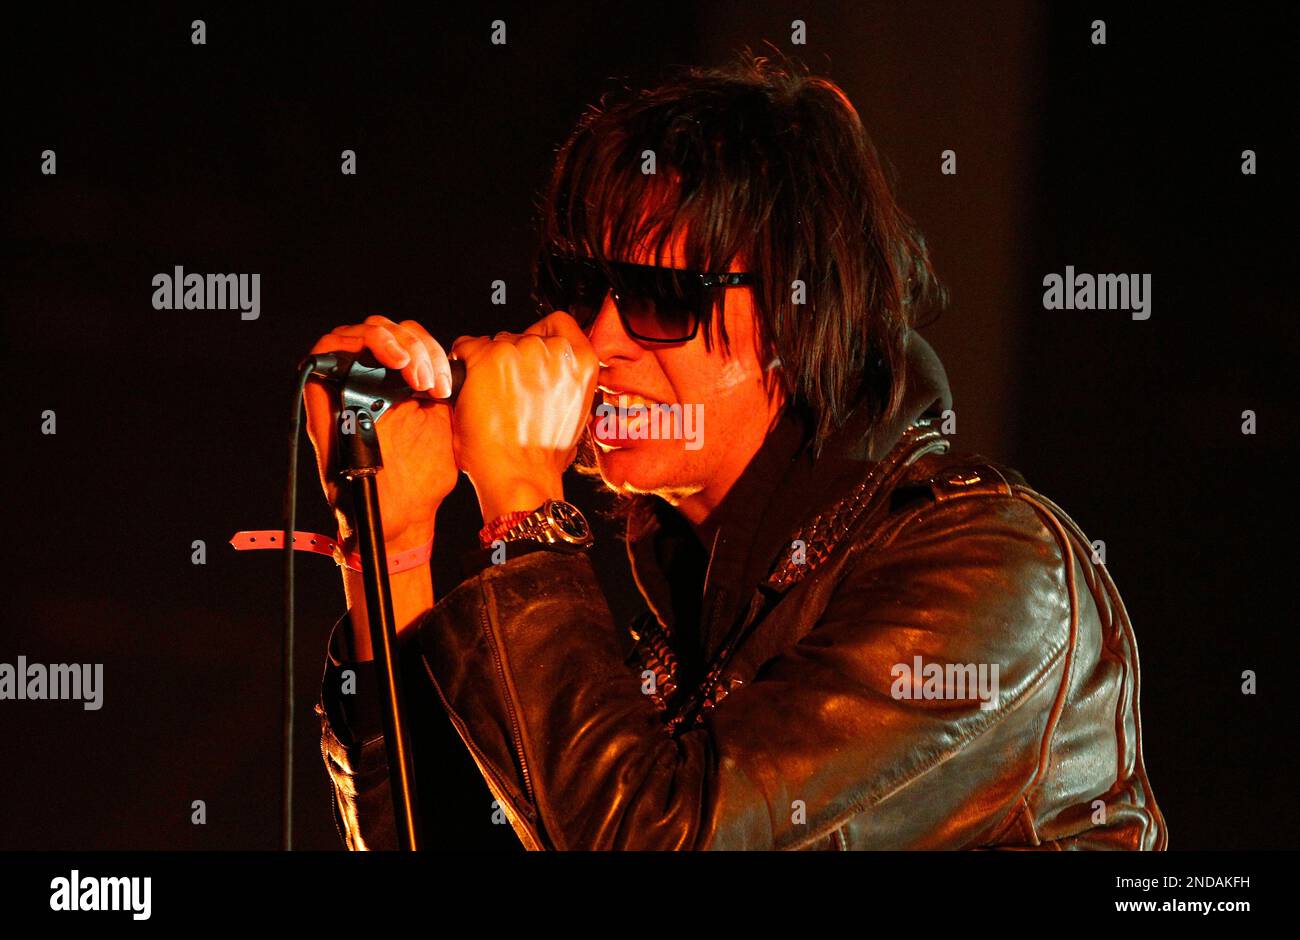 Julian Casablancas of The Strokes performs at the Lollapalooza music festival in Chicago on Friday, August 6, 2010. (AP Photo/Brian Kersey) Stock Photo